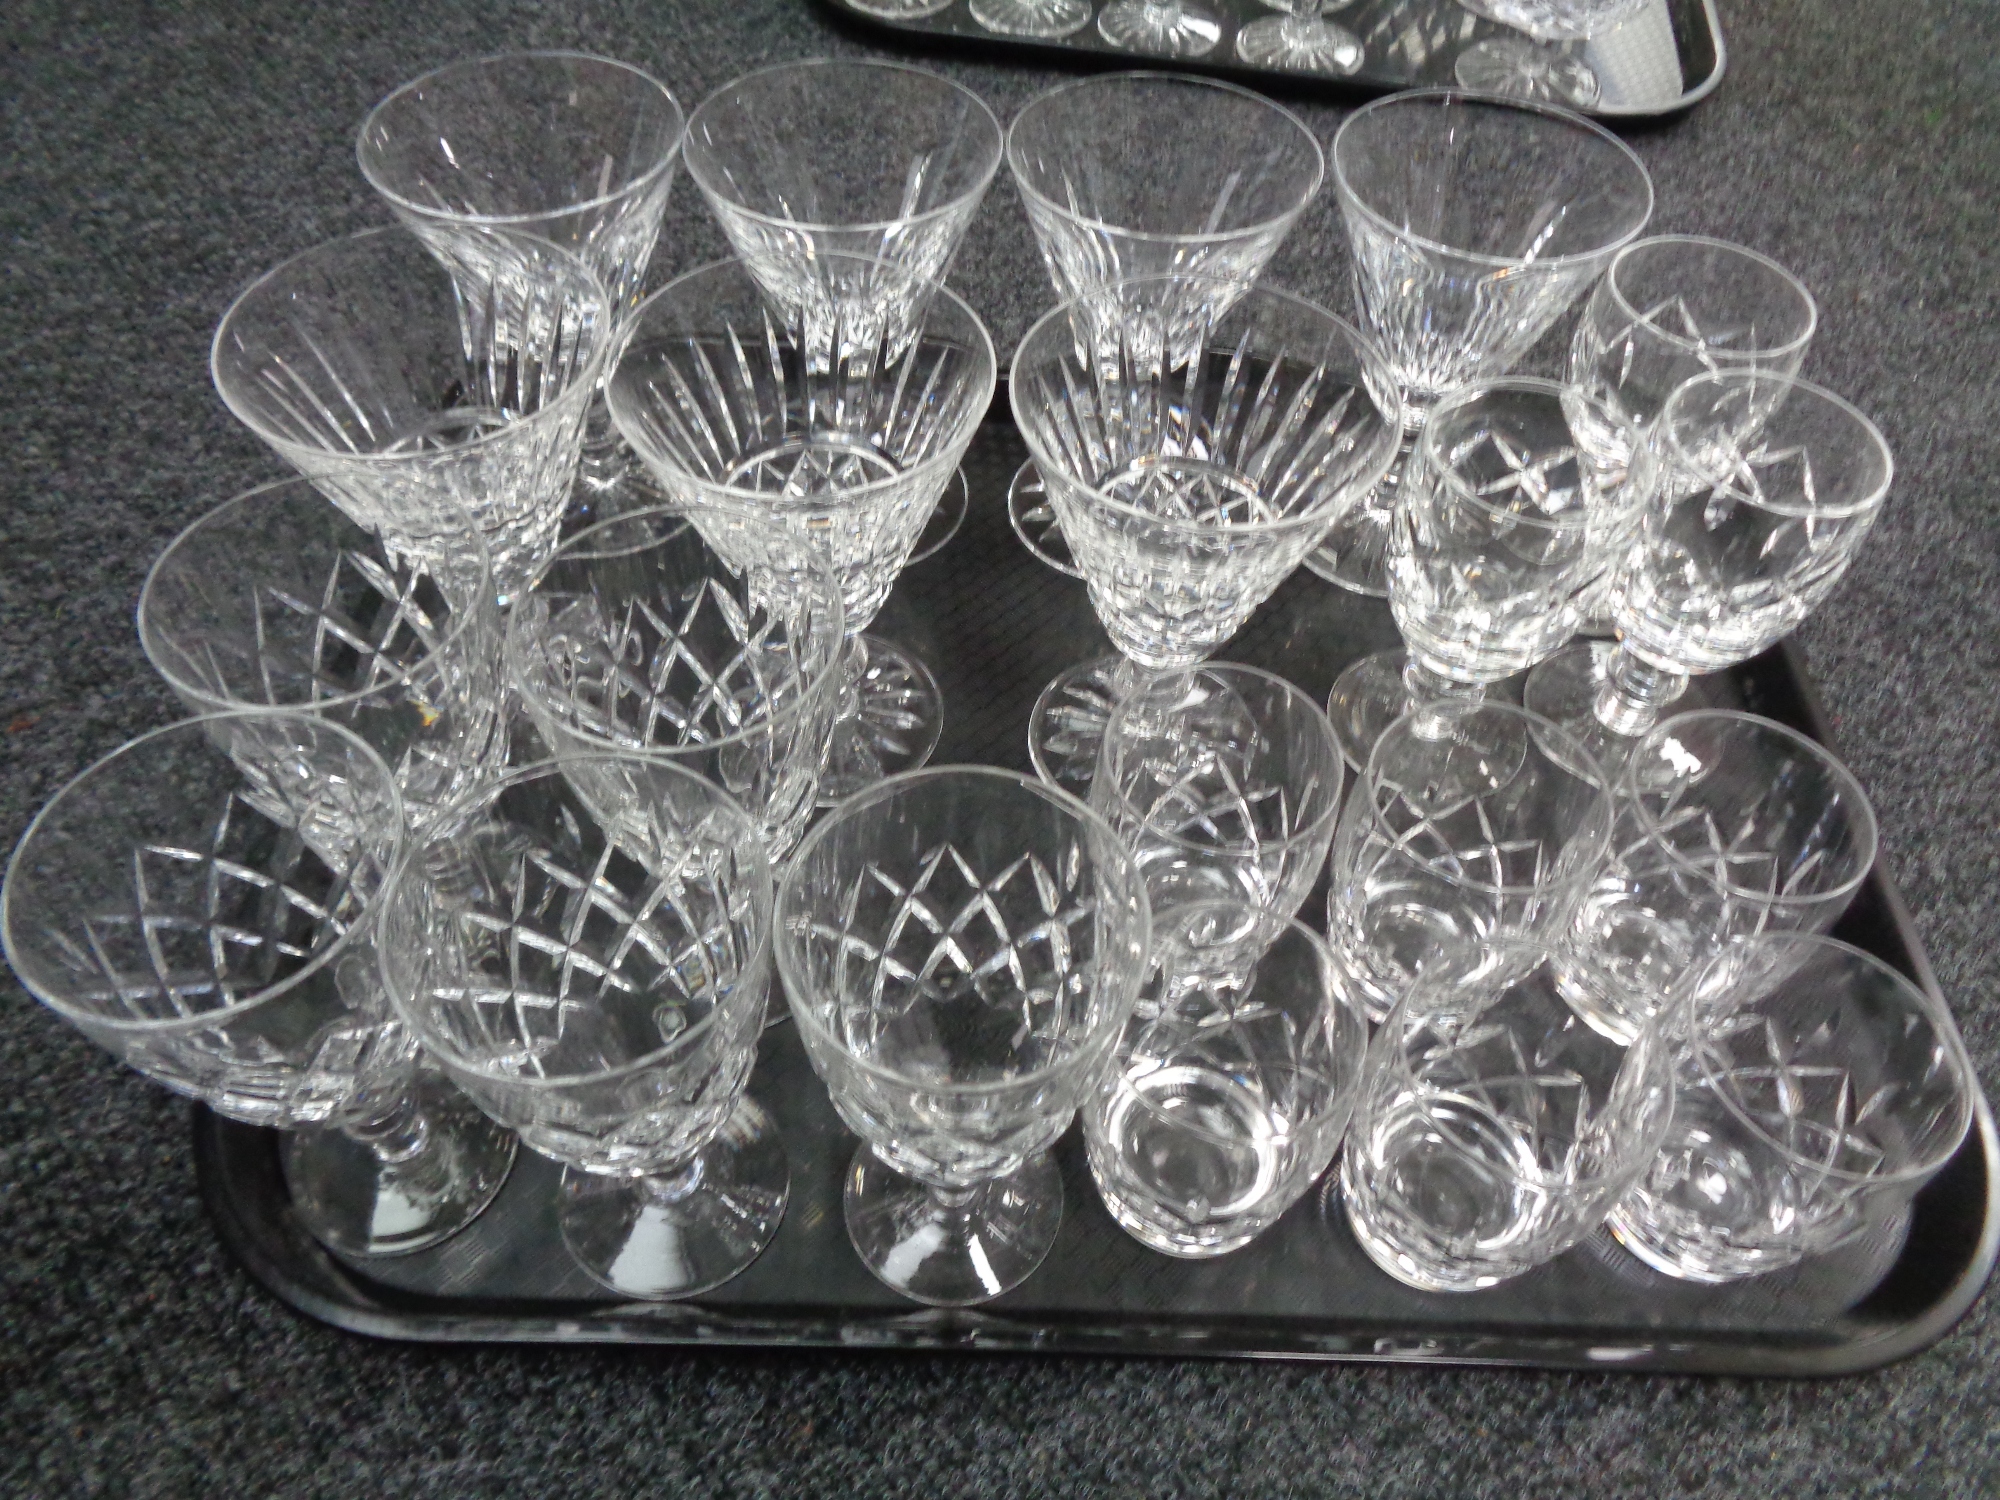 A tray of assorted lead crystal drinking glasses